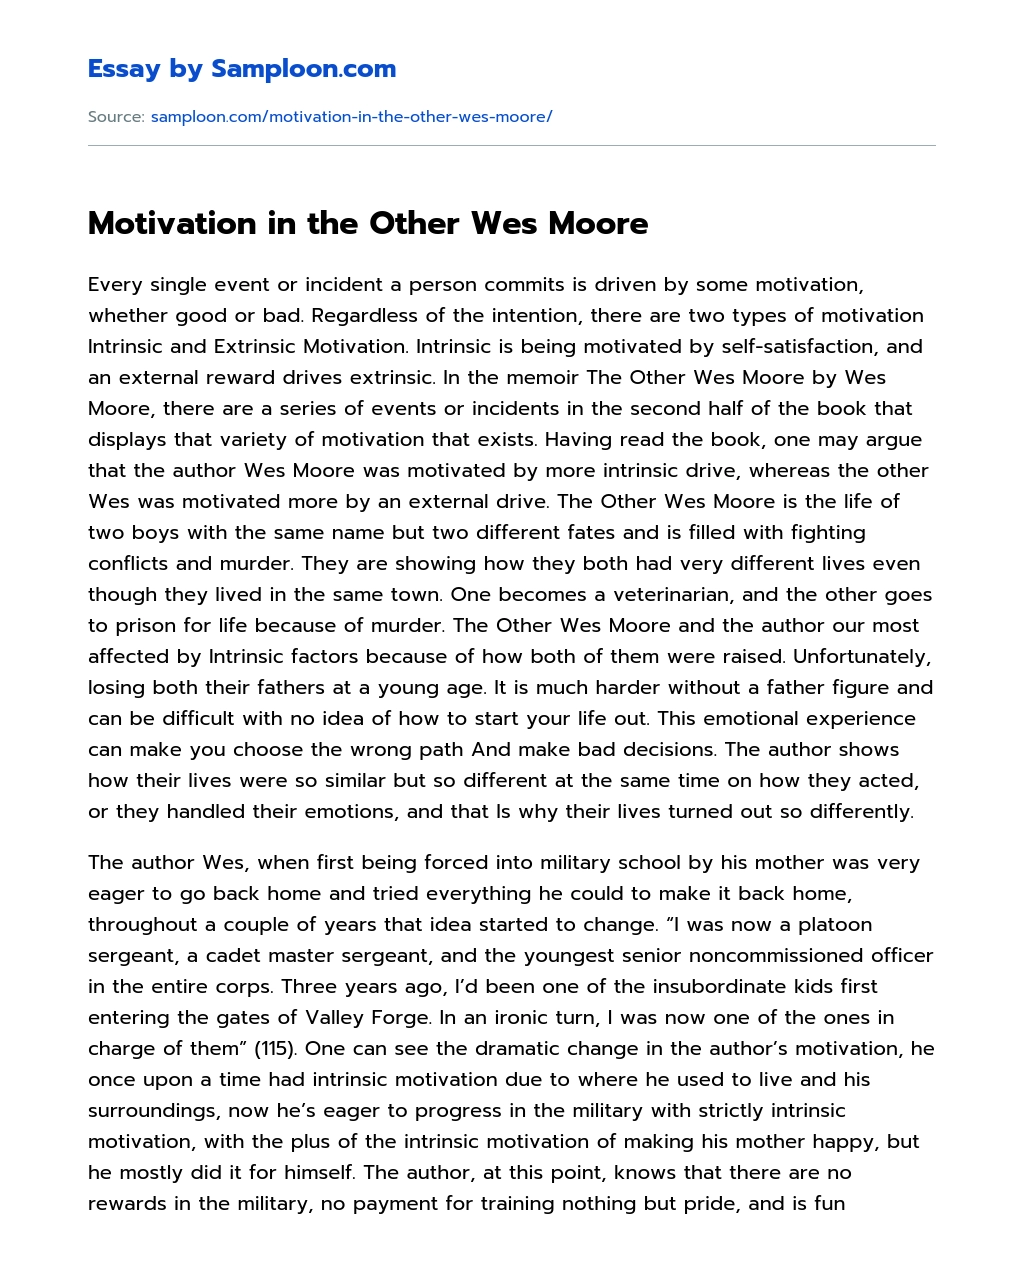 Motivation in the Other Wes Moore Compare And Contrast essay